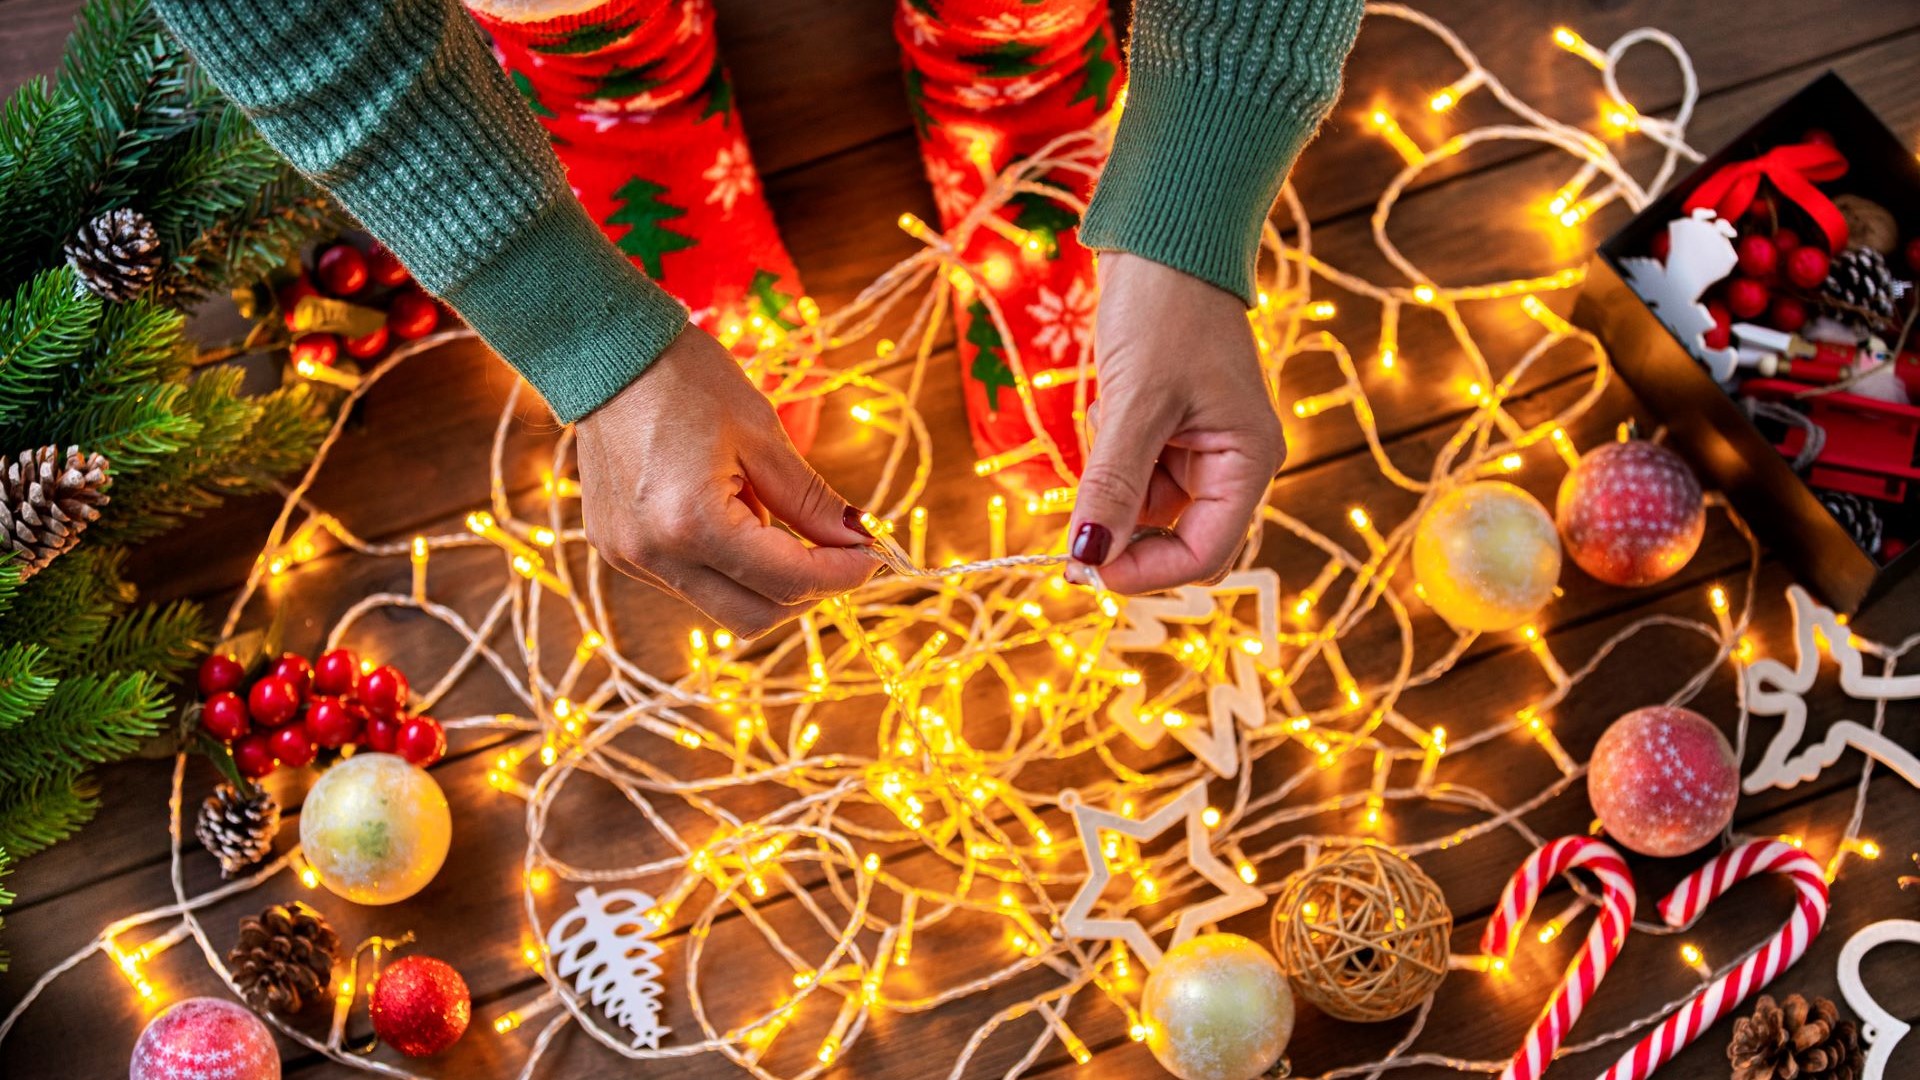 How to store Christmas lights: 9 great ideas for tangle-free